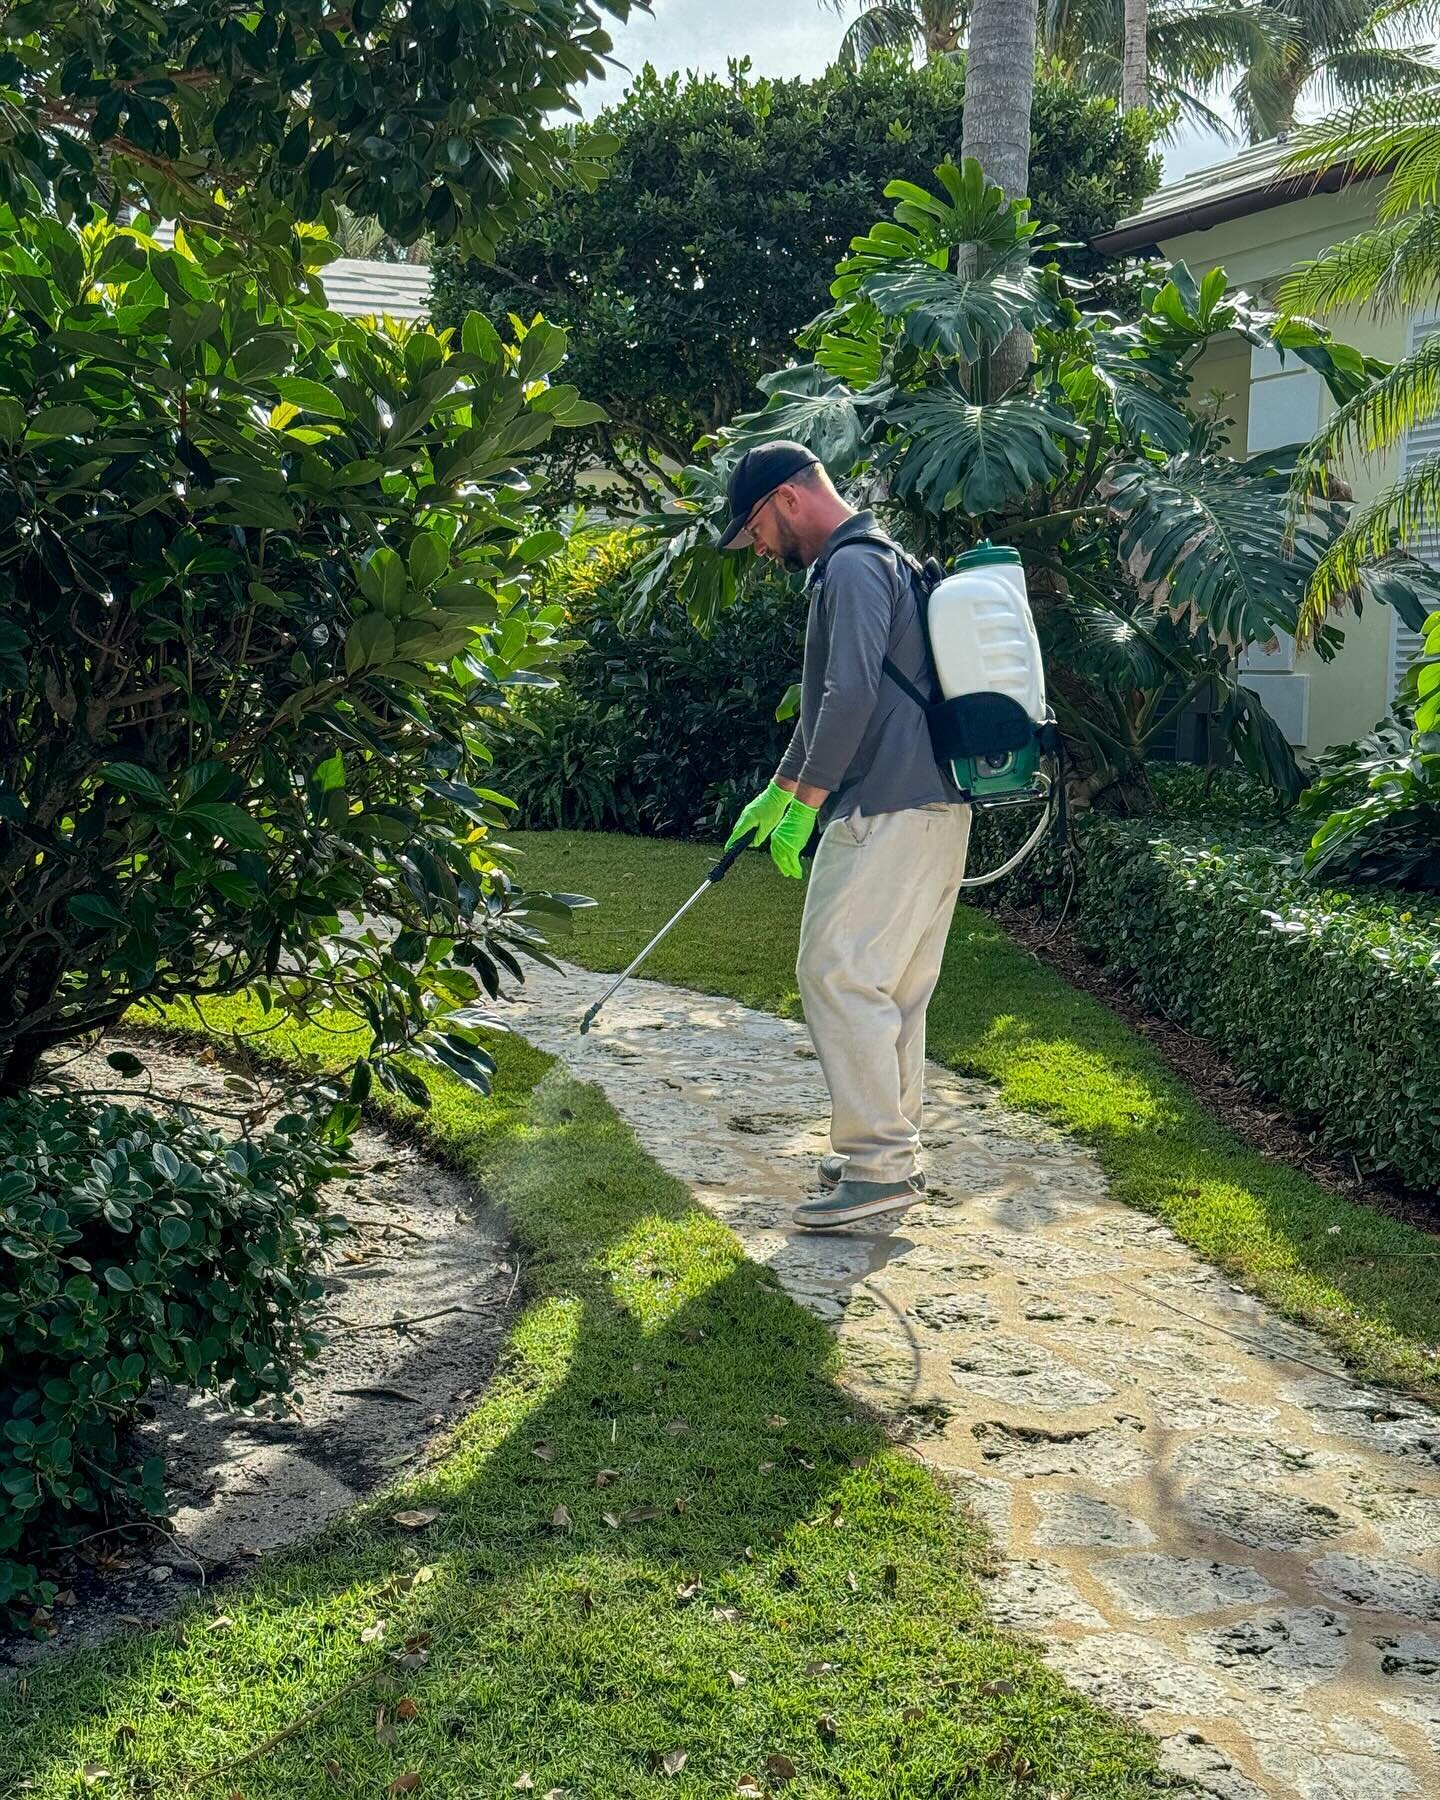 Just like the inside of your home can get #bugs, so can your grass!

The less you maintain or proactively treat your lawn the more susceptible the turf is to build up of weeds, fungus, and bugs. The appearance can diminish quickly and damage spreads 